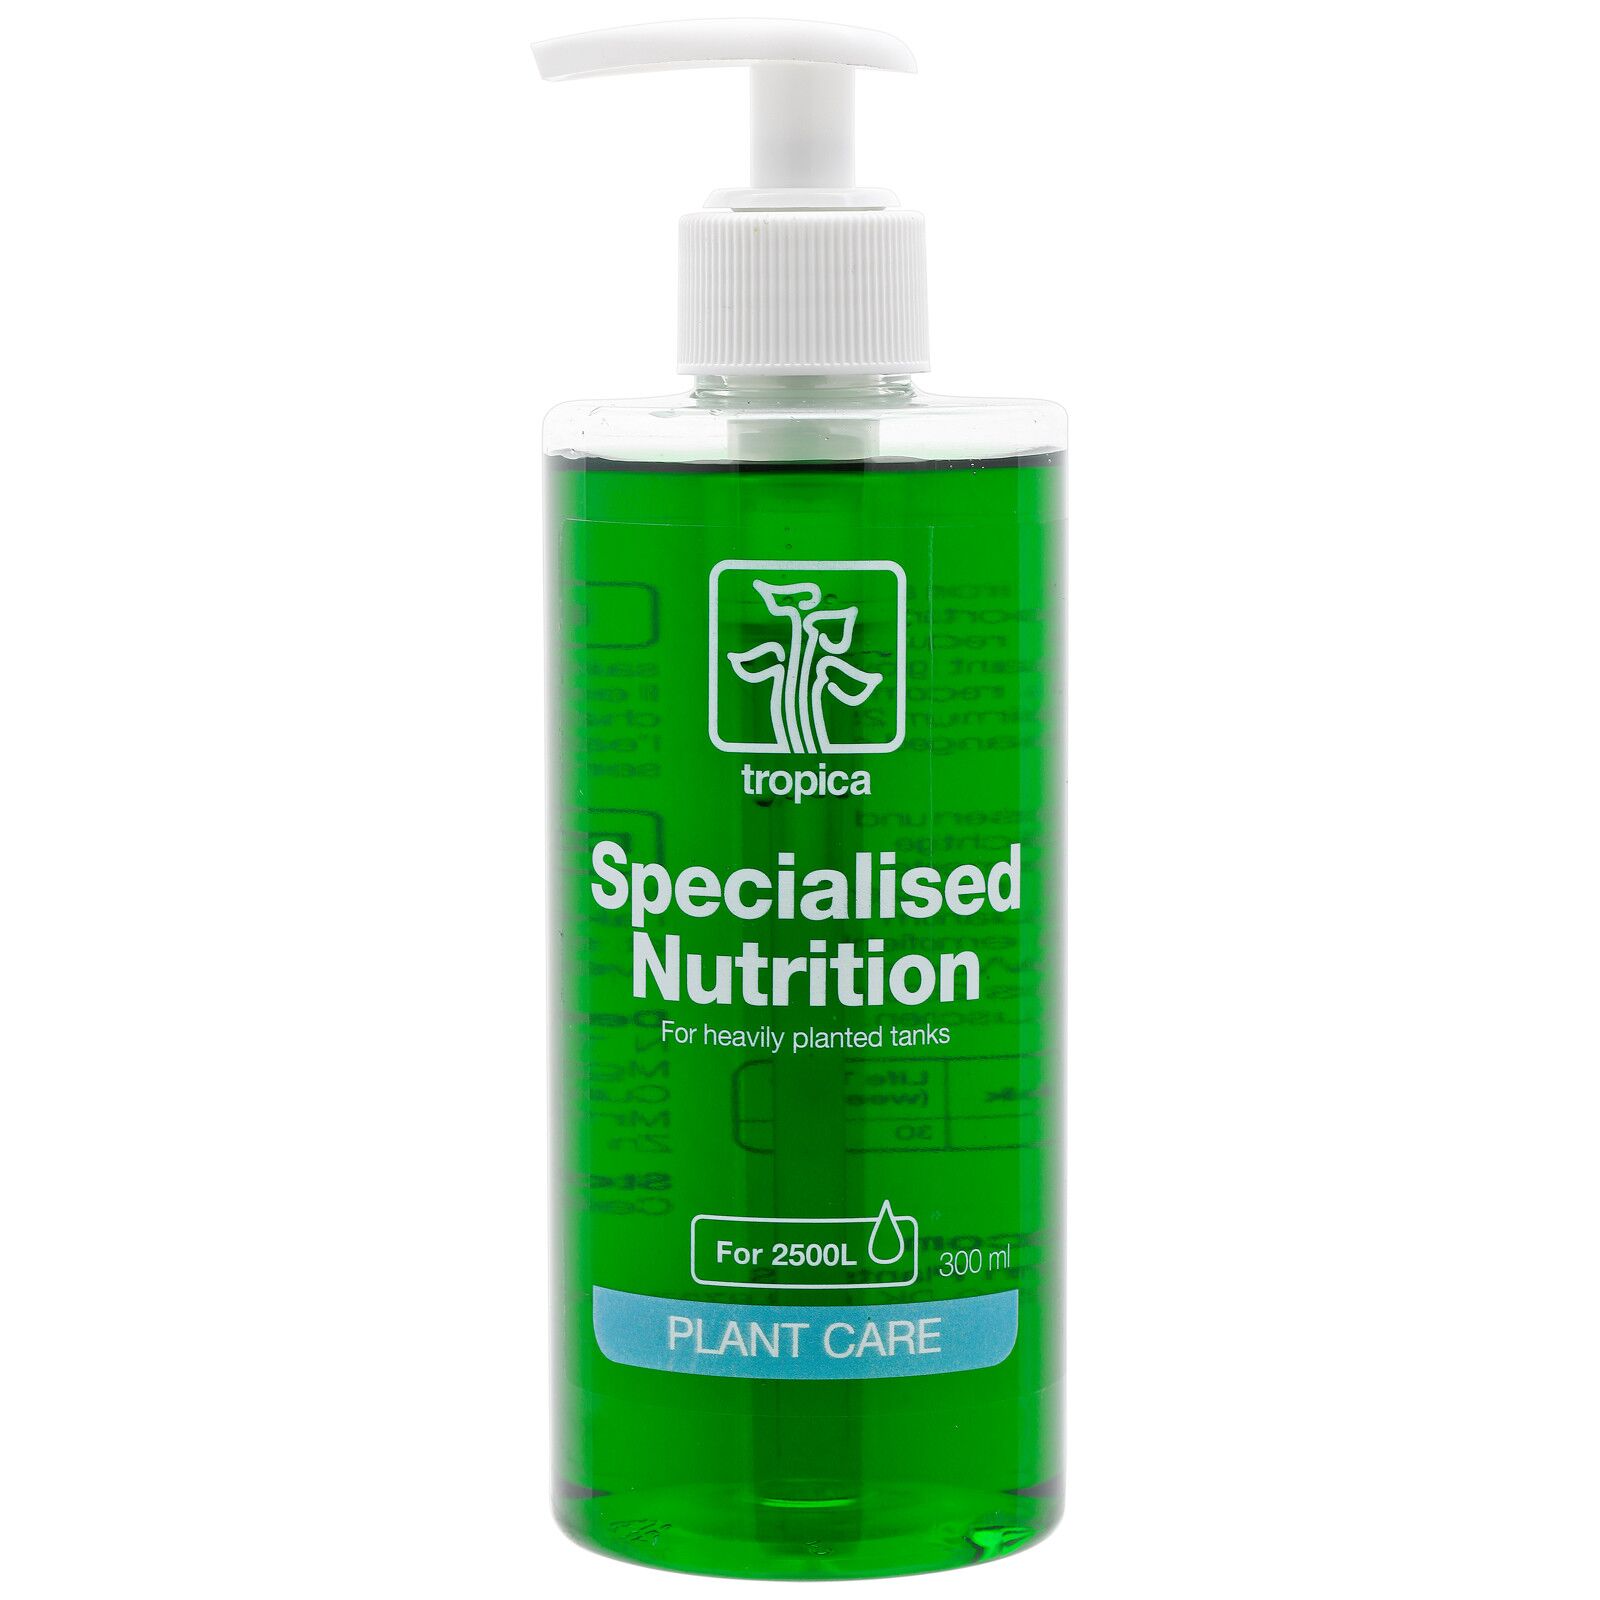 Tropica - Specialised Nutrition